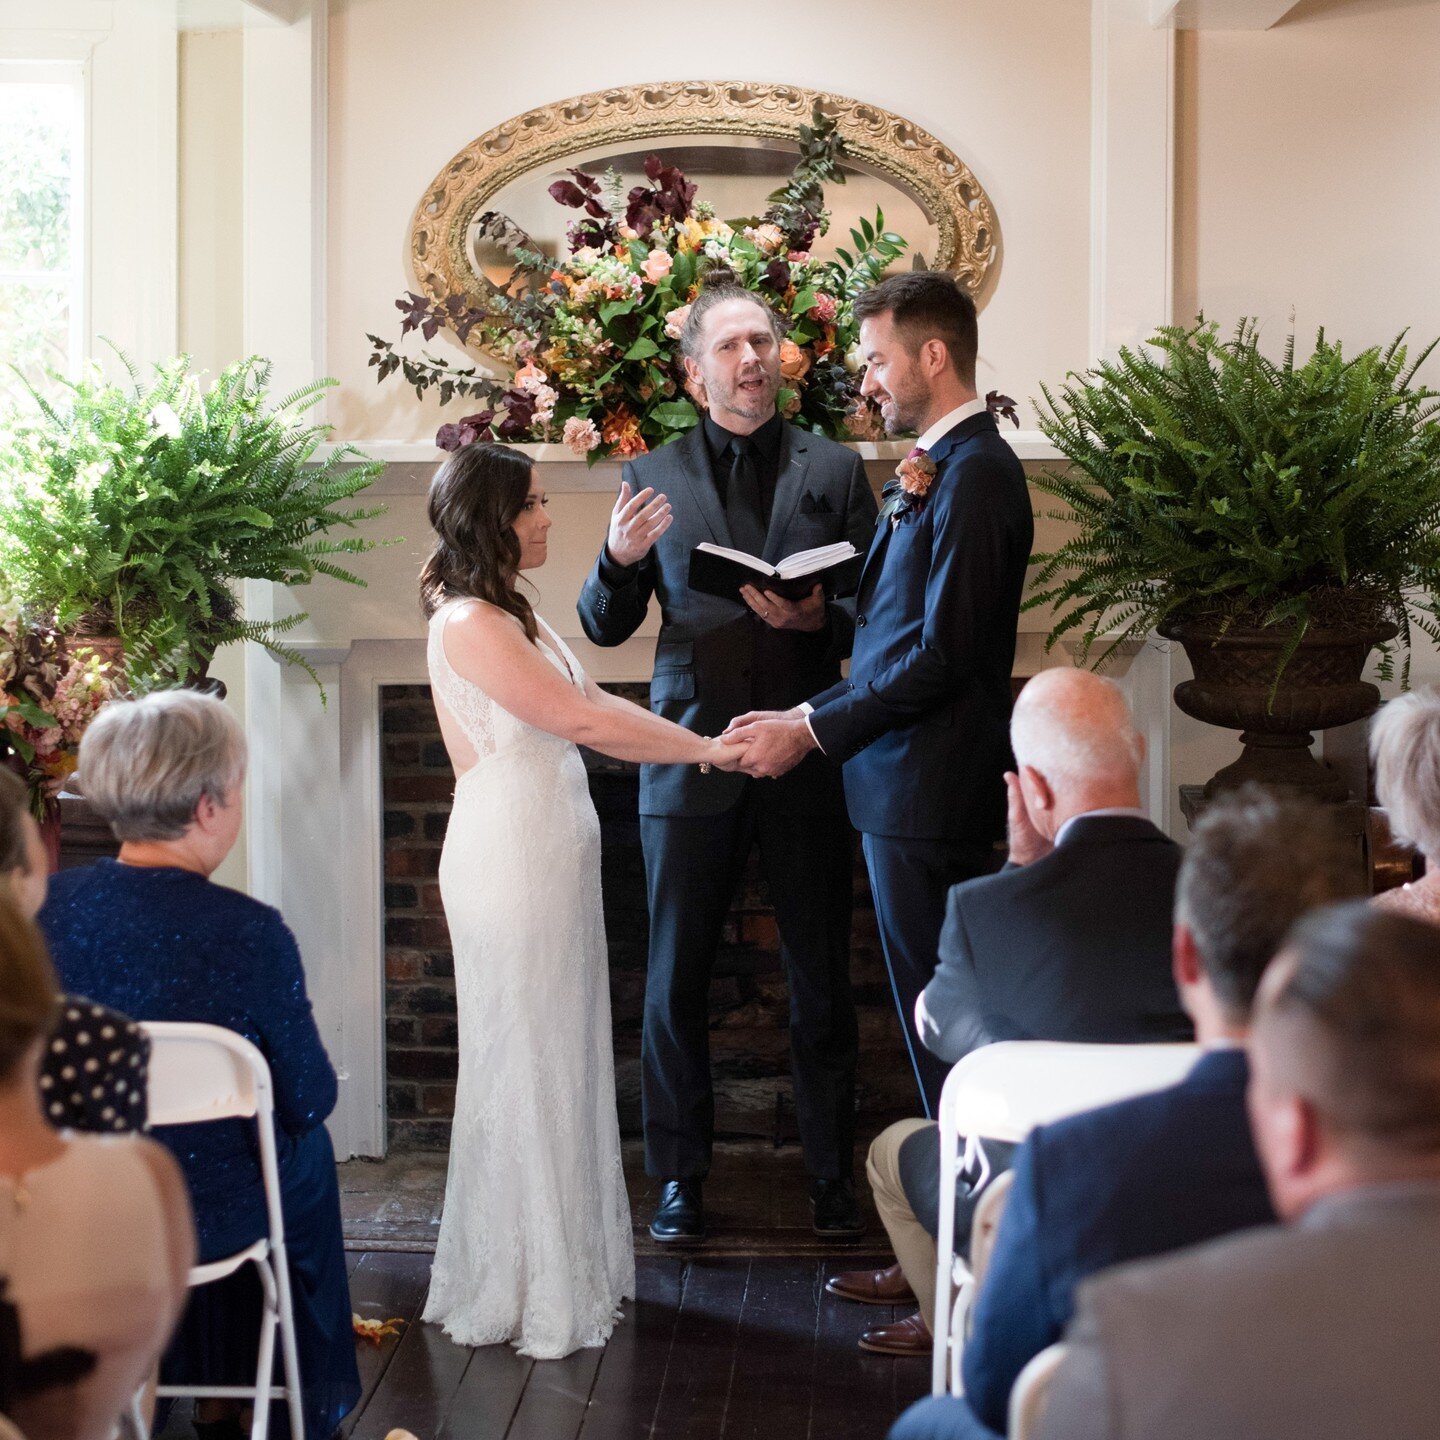 Thinking of eloping? We have just the space! The Cool Springs House offers many options for intimate wedding in every season. 
.
.
.
#photography @emlyjeanrosserphotography 

#nashville #wedding #elope #isaidyes #engaged #nashvilleweddng #elopementna